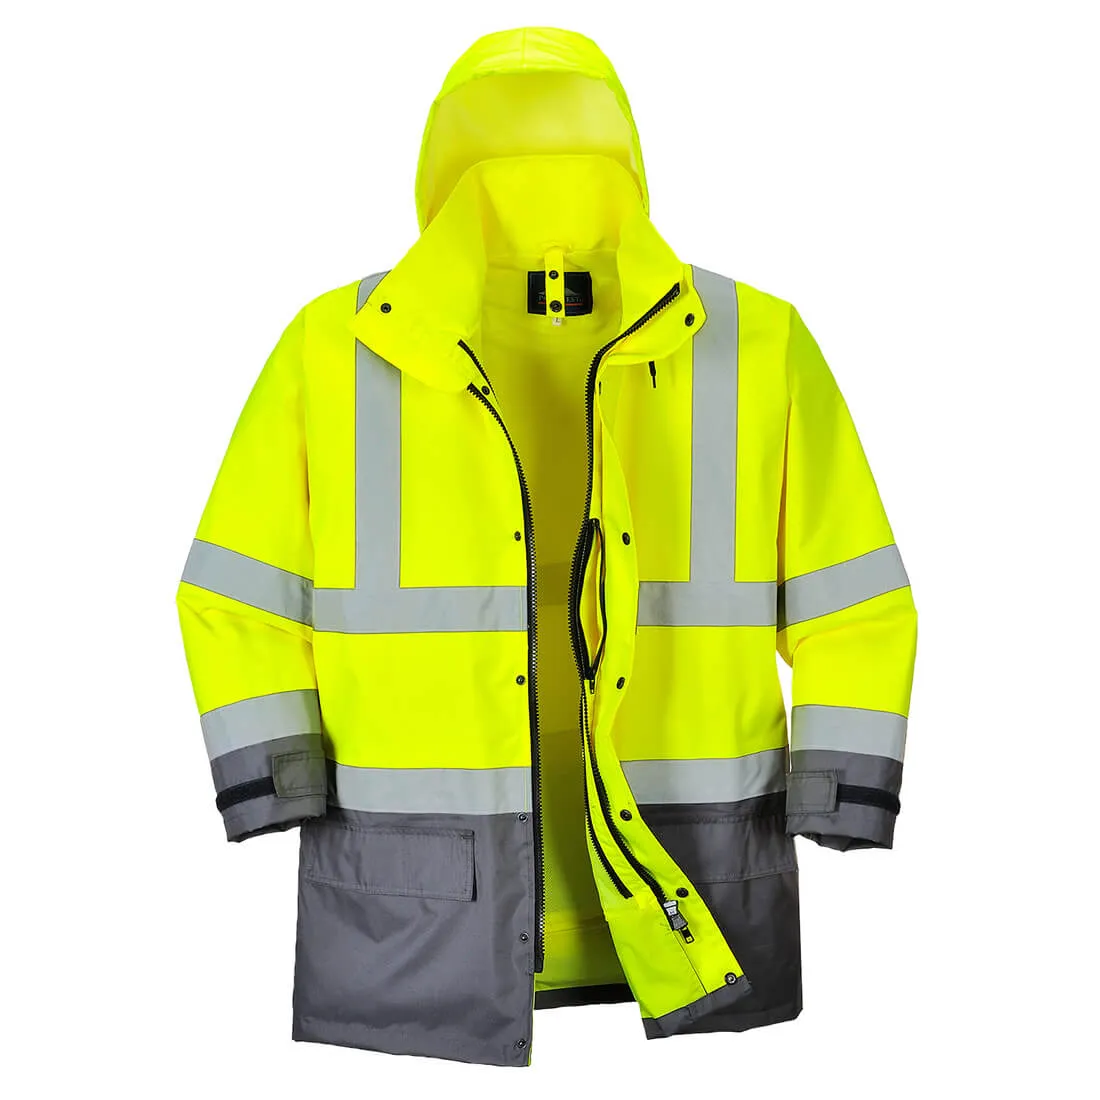 Oxford Weave 300D Class 3 Hi Vis 5-in1 Executive Jacket - Yellow / Grey, S